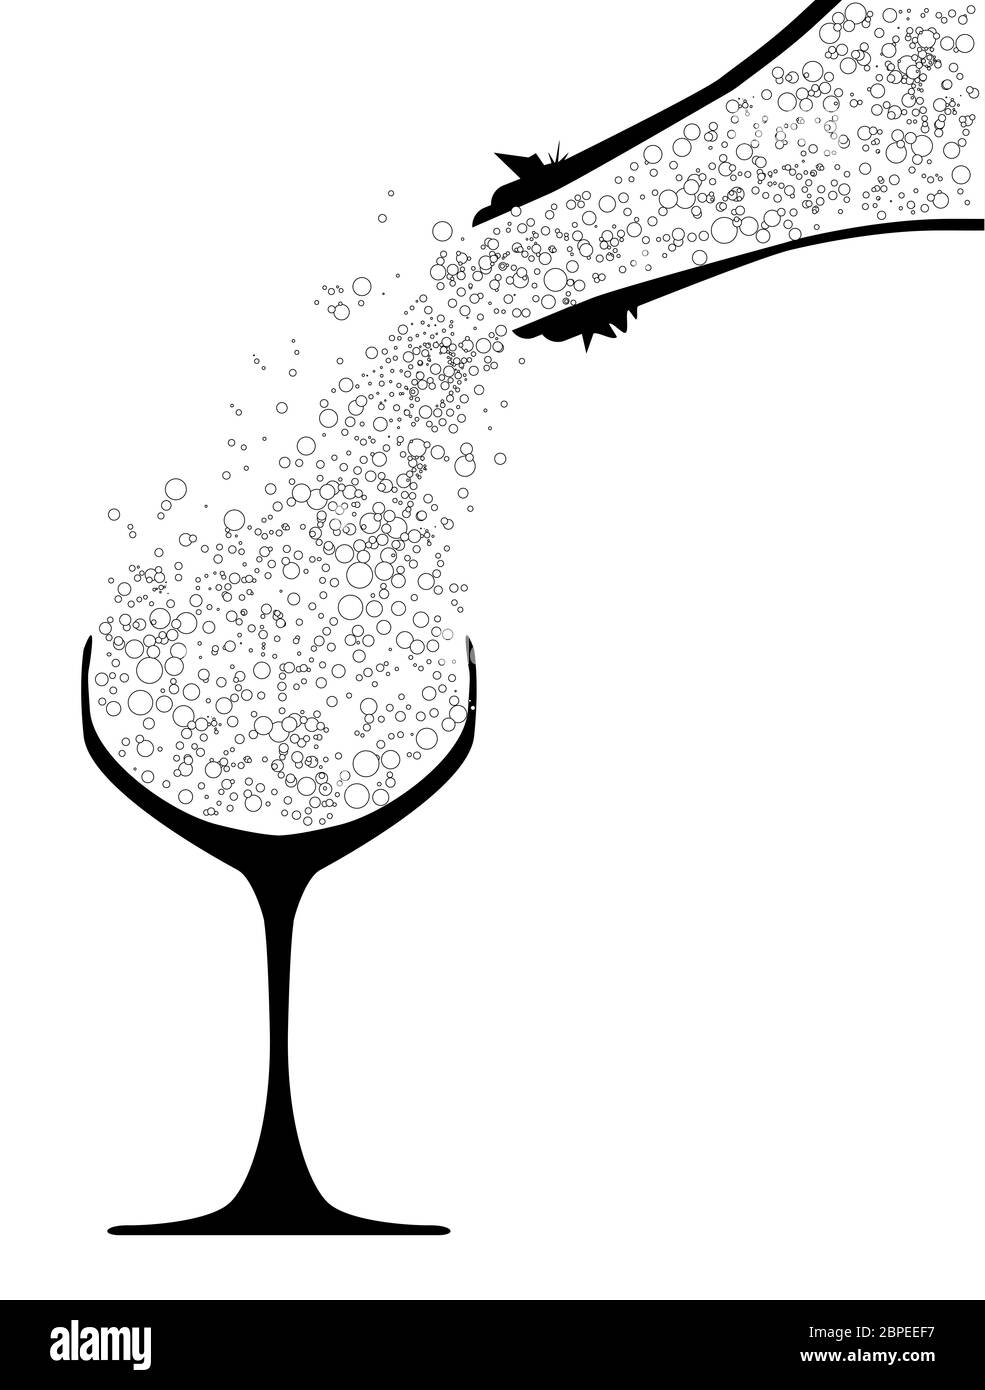 A champagne glass being filled with bubbles. Stock Photo